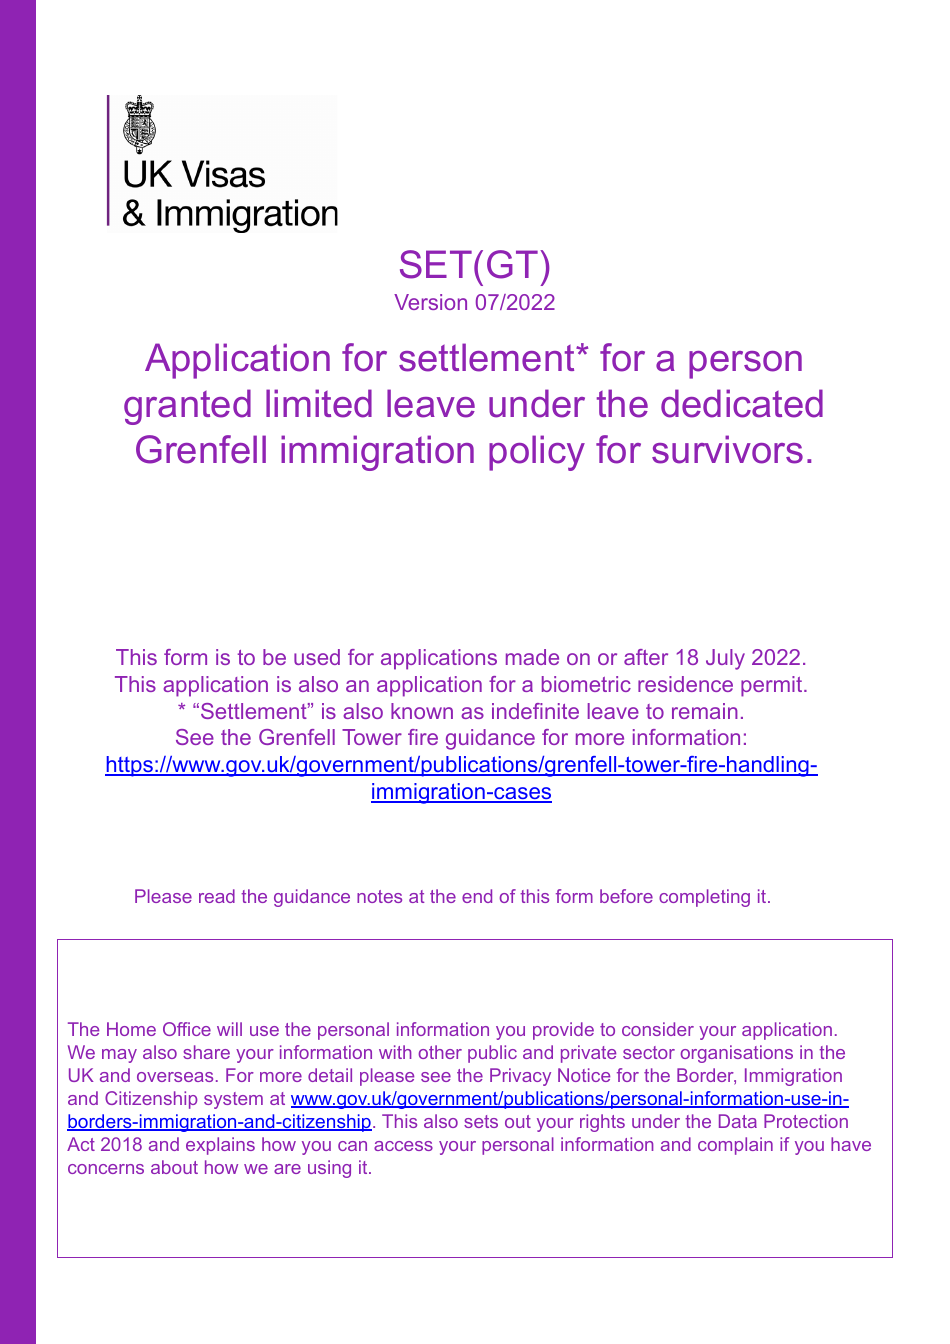 Form SET(GT) Application for Settlement for a Person Granted Limited Leave Under the Dedicated Grenfell Immigration Policy for Survivors - United Kingdom, Page 1